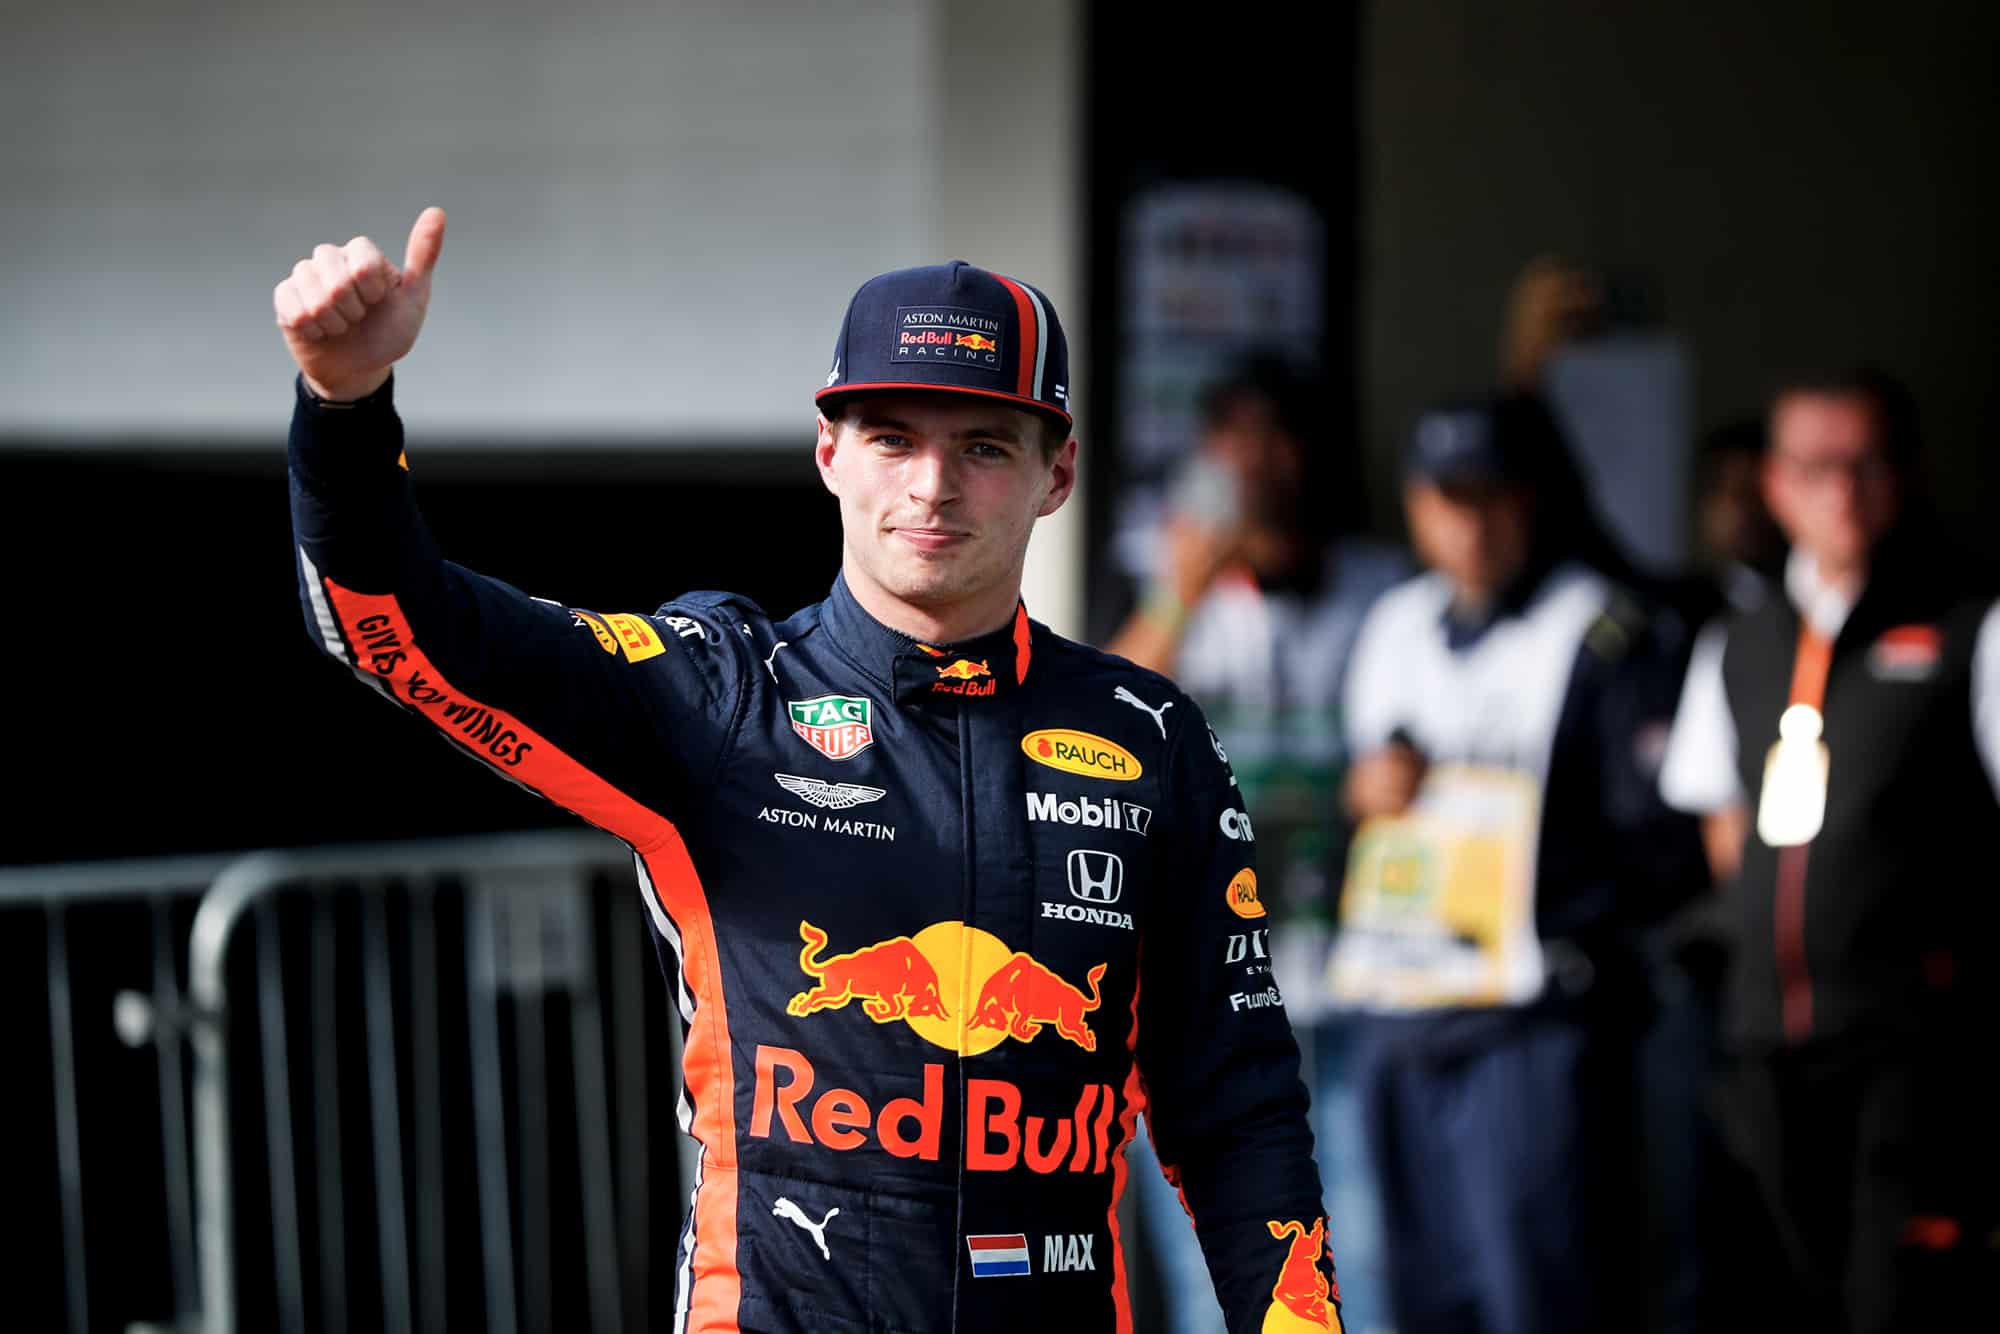 Max Verstappen gives a thumbs up after clinching pole position at the 2019 F1 Brazilian Grand prix